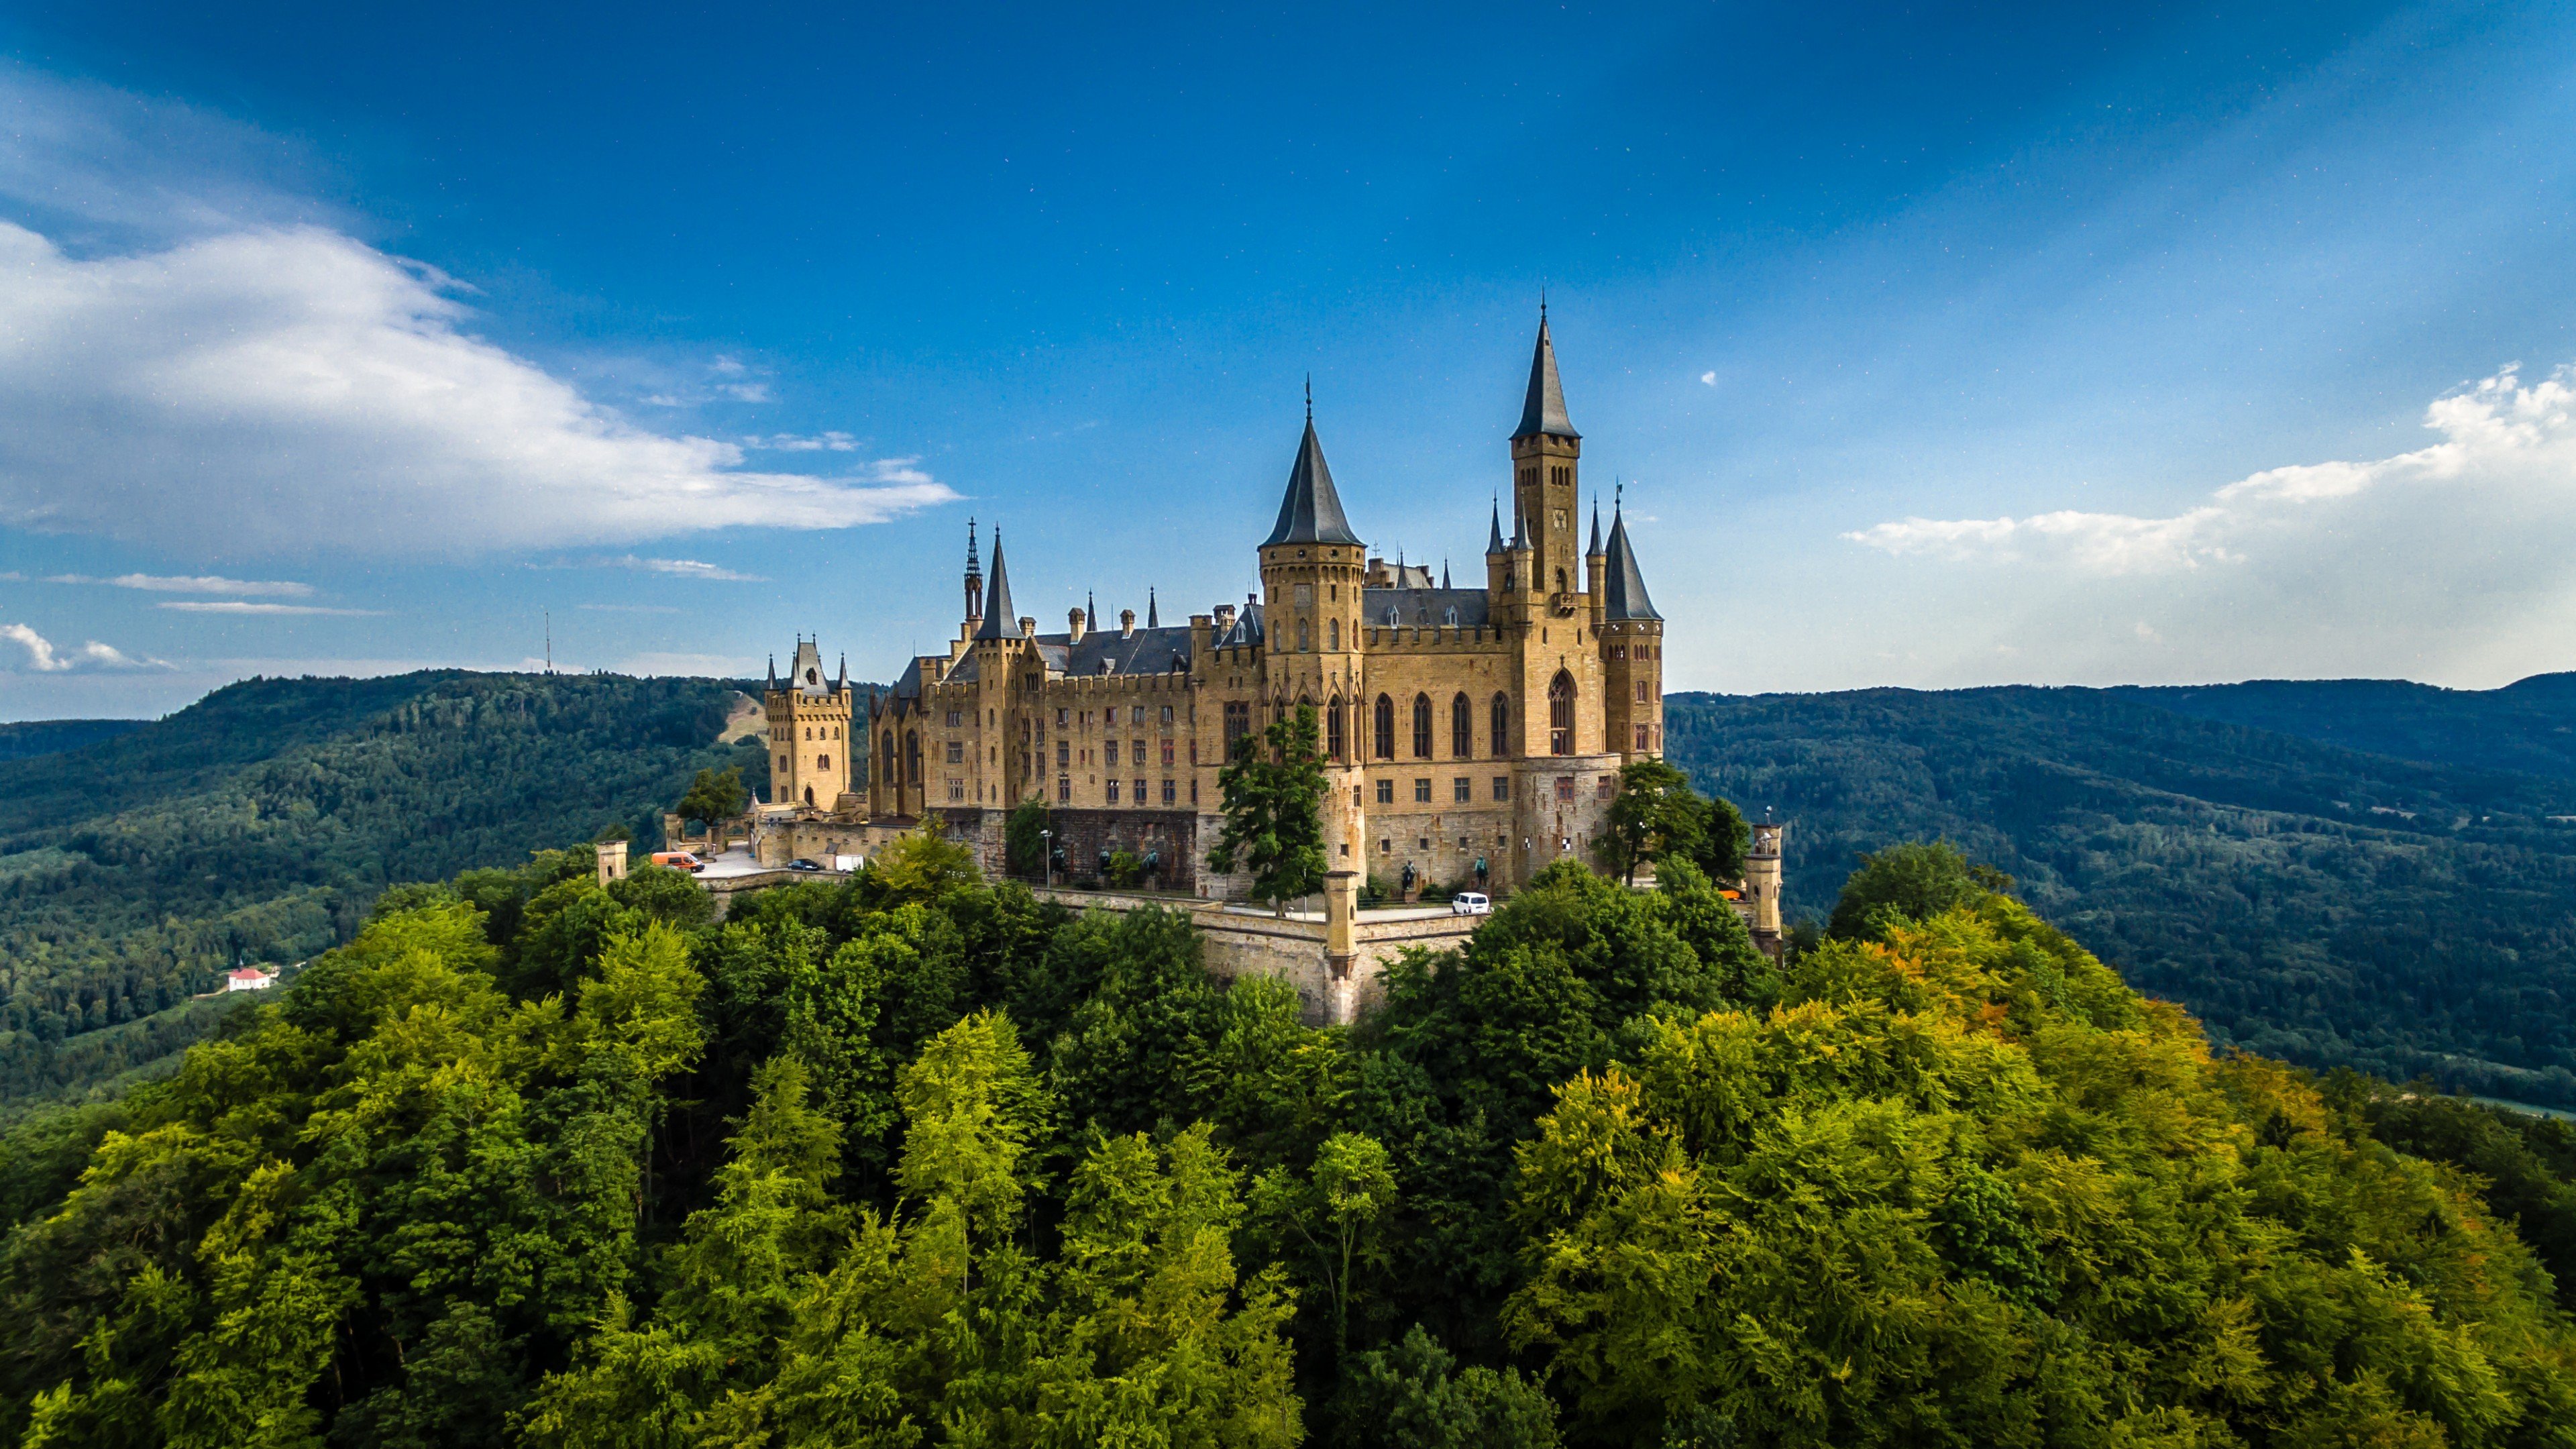 Hohenzollern 4K wallpaper for your desktop or mobile screen free and easy to download